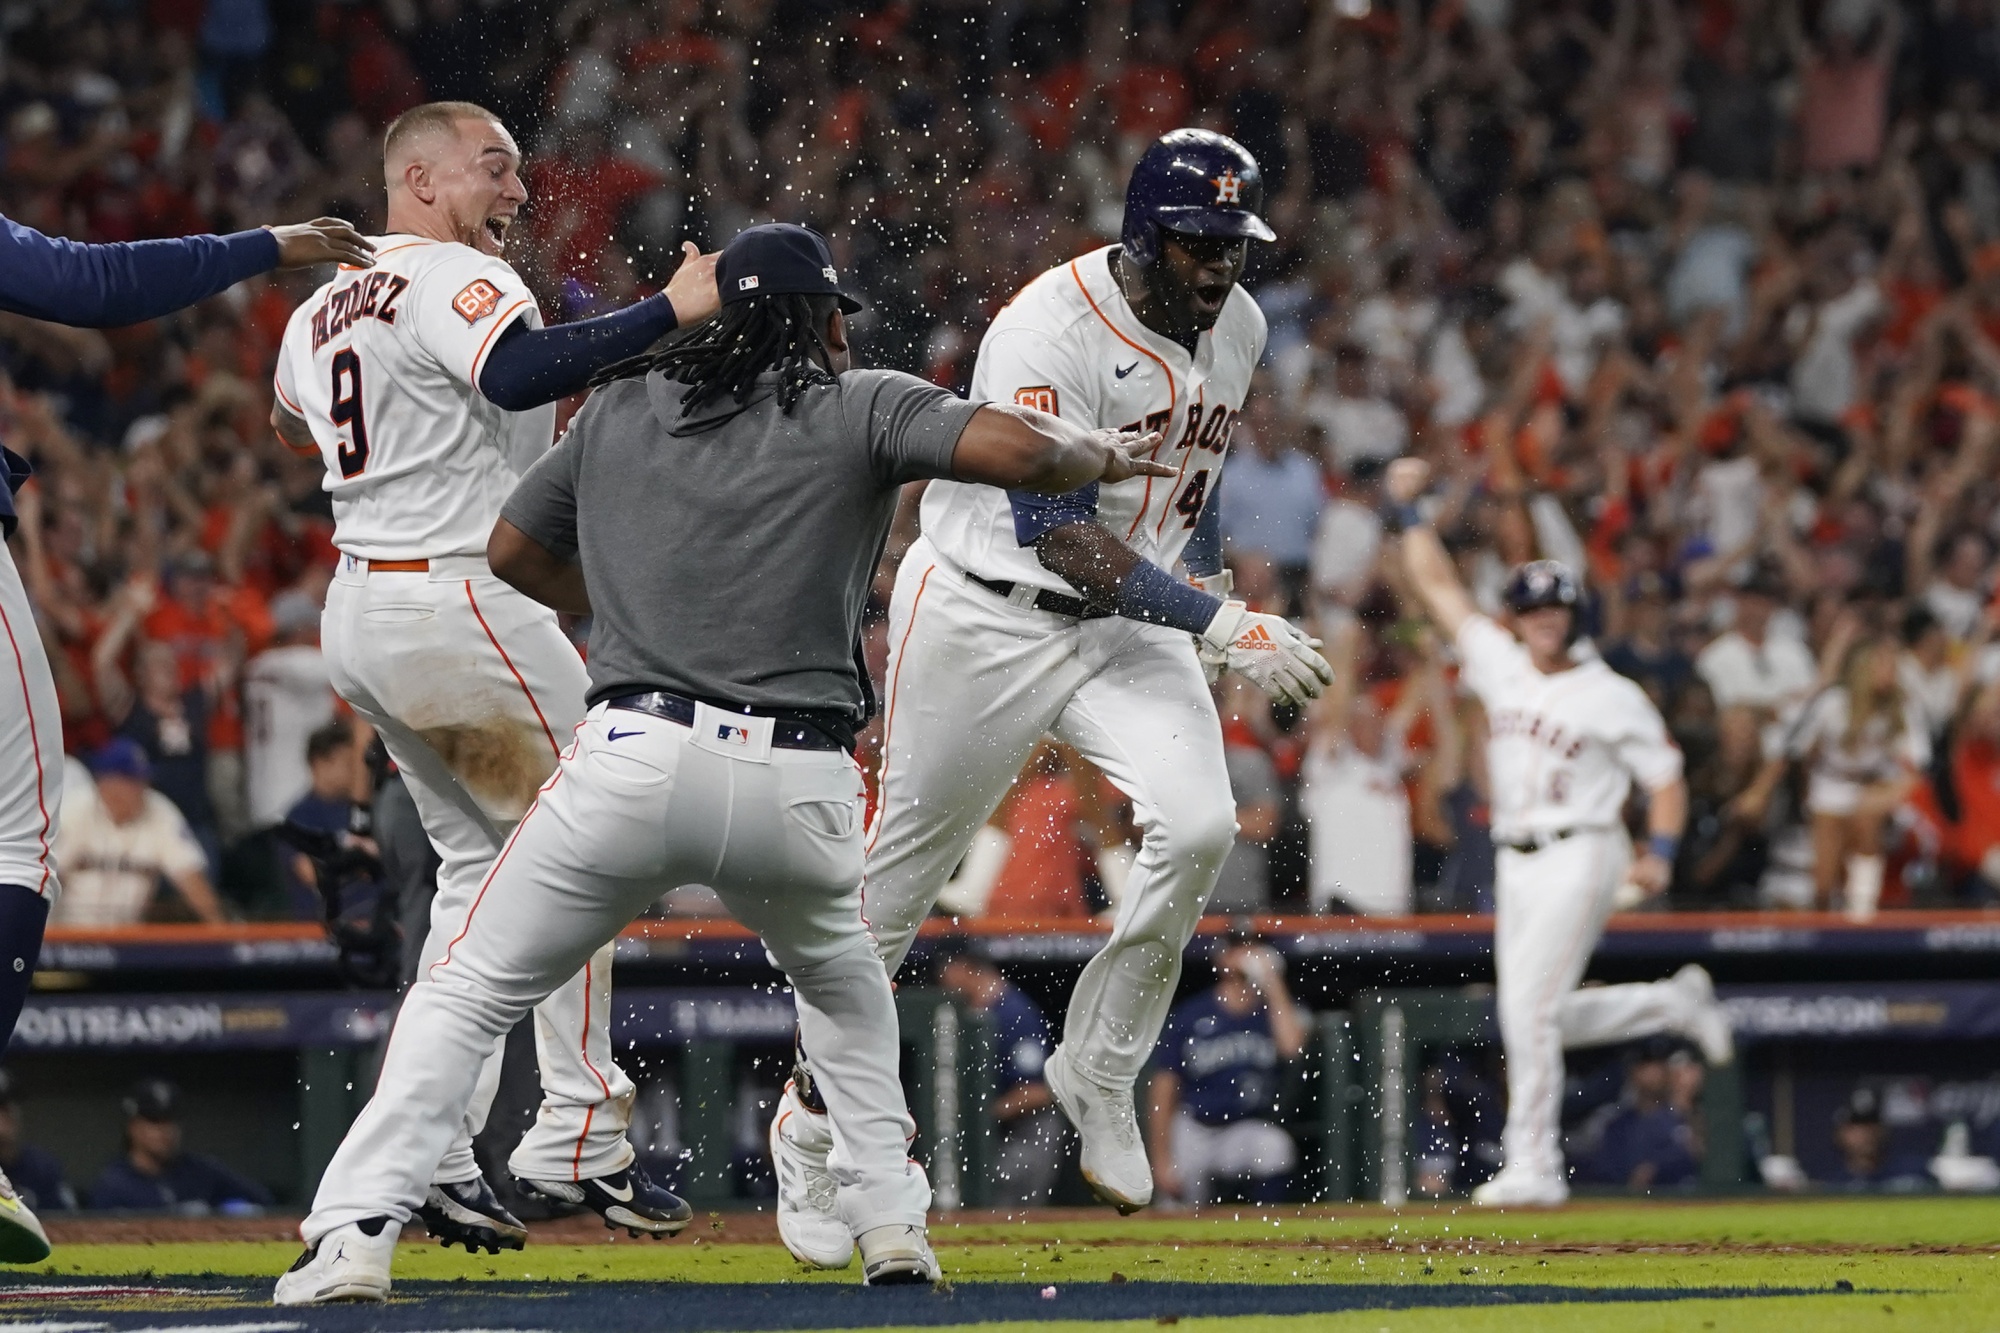 The Astros need Yordan Alvarez to step up in order to continue the series  and the 'MLB on FOX' crew discusses